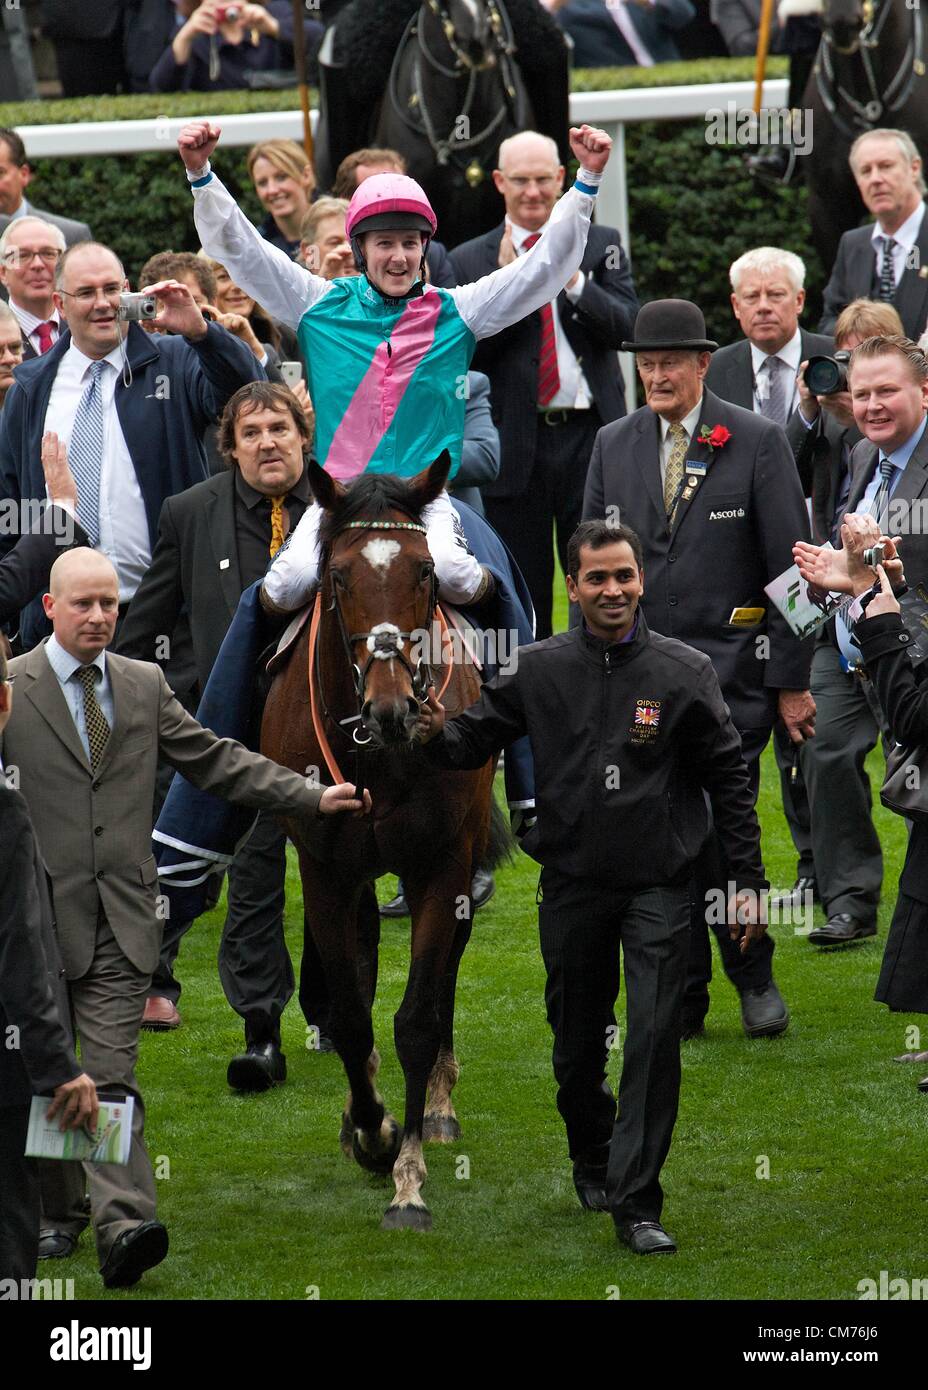 Ascot, UK. 20th October 2012. Jockey Tom Queally returns to the winners enclosure on board Frankel after winning the Qipco Champion Stake Credit:  Paul McCabe / Alamy Live News Stock Photo